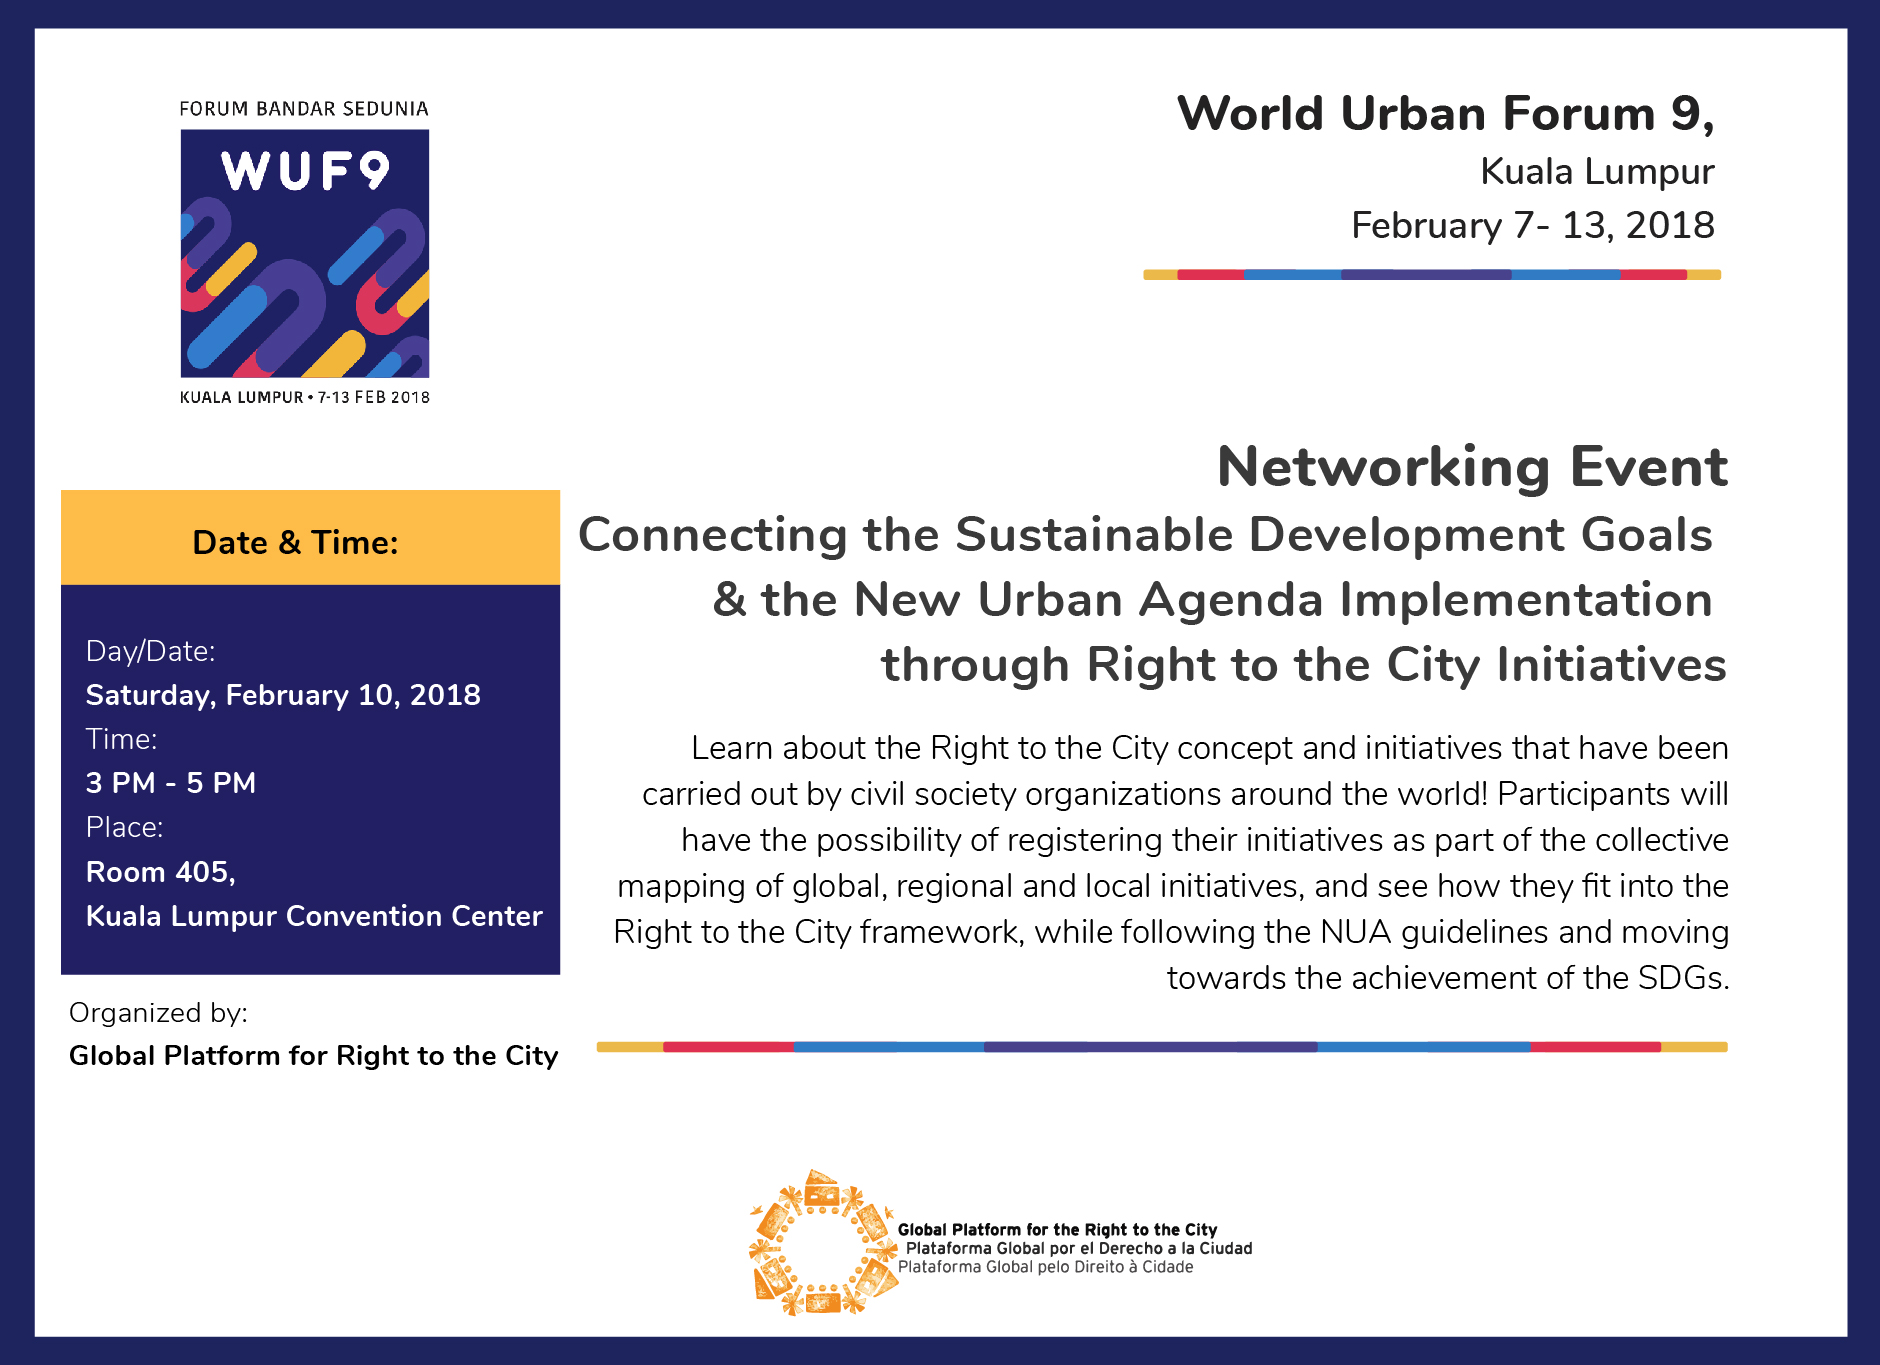 WUF9 Networking event. Connecting the Sustainable Development Goals & the New Urban Agenda Implementation through Right to the City Initiatives